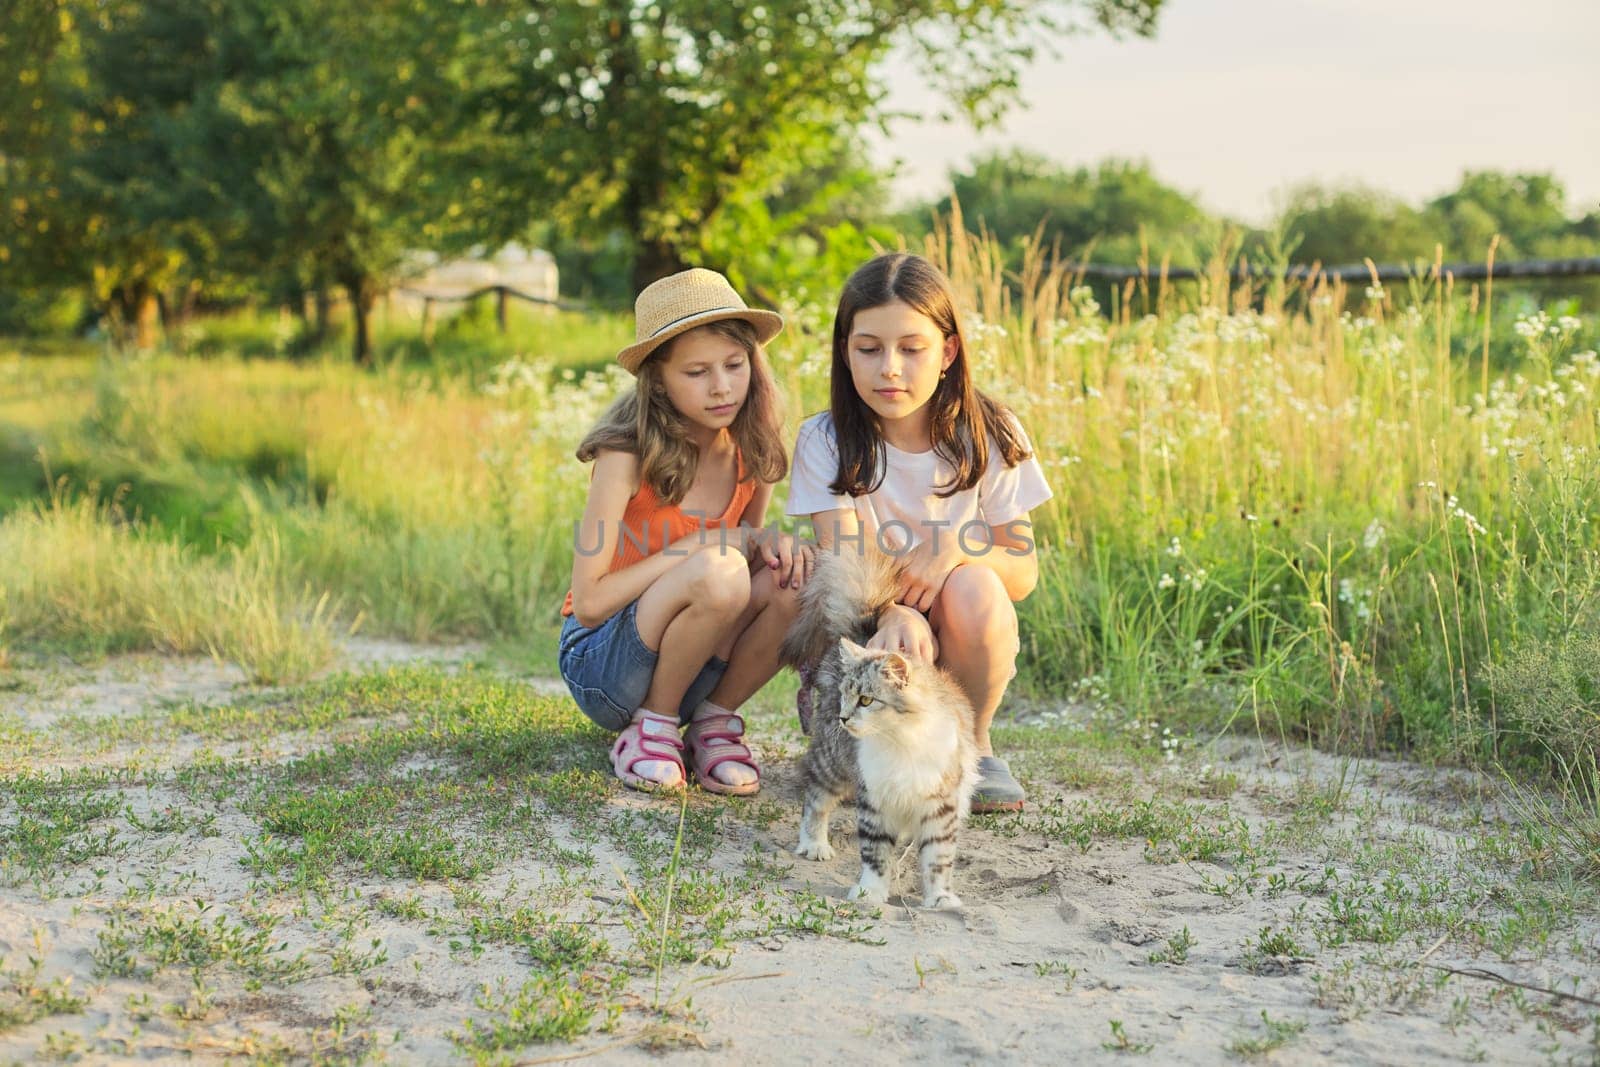 Children two girls playing with a gray fluffy cat outdoor. Beautiful sunset country landscape background